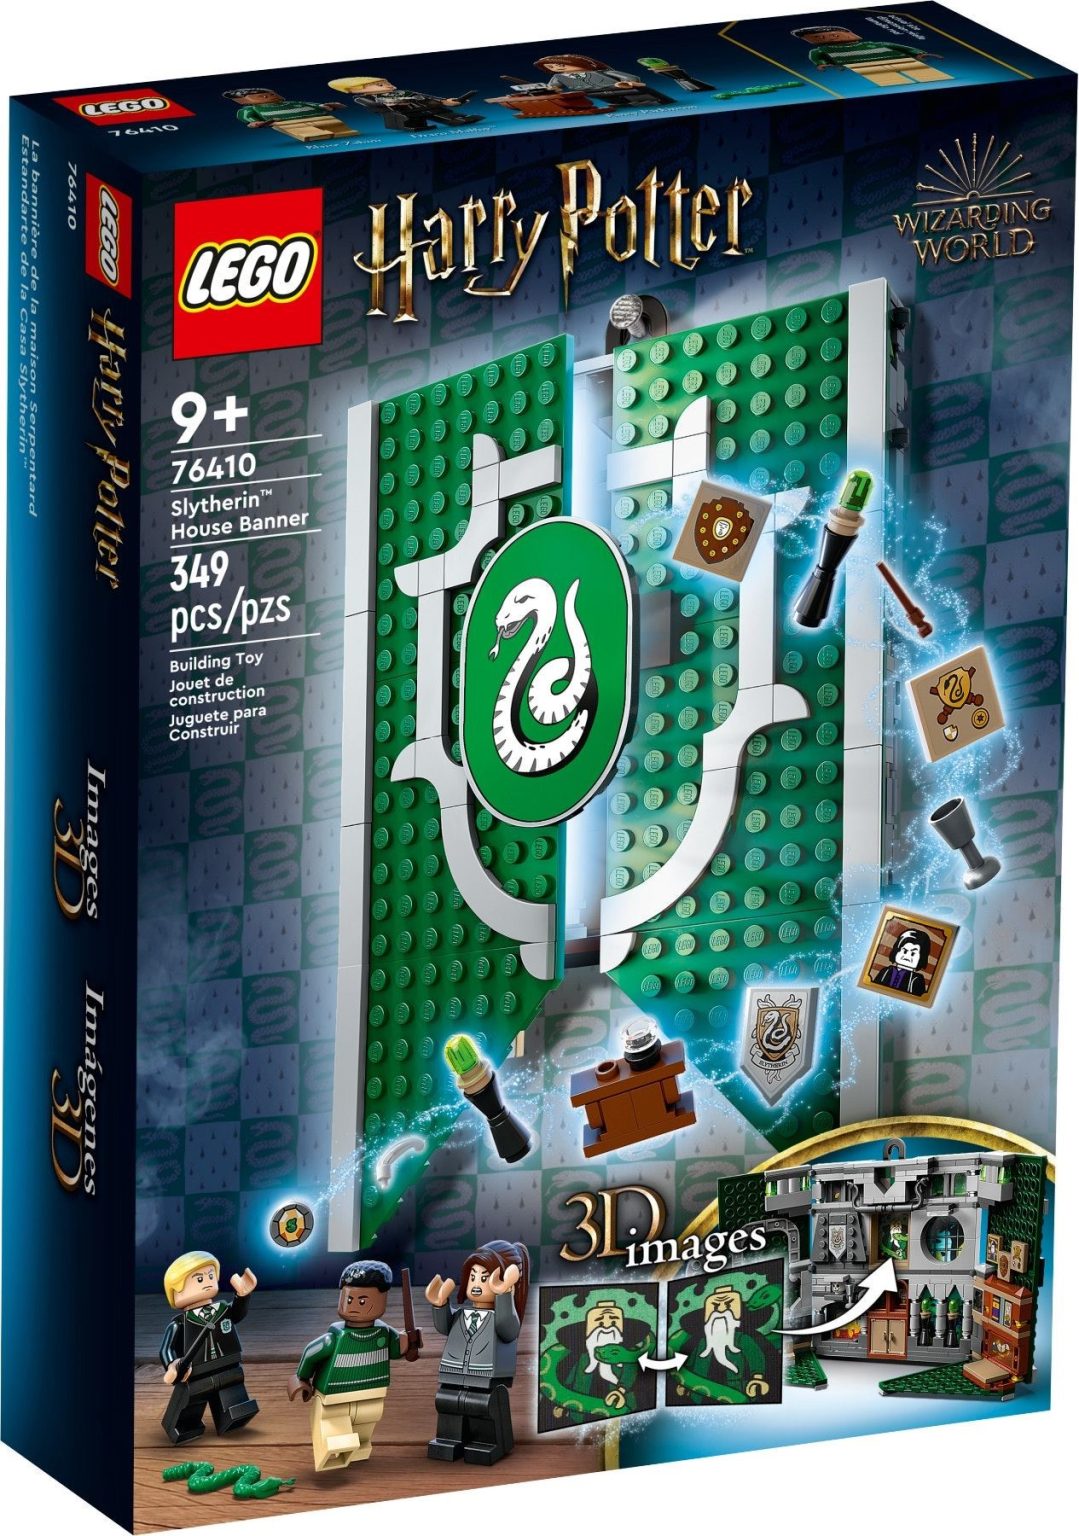 Every LEGO Harry Potter set retiring in 2023 and beyond